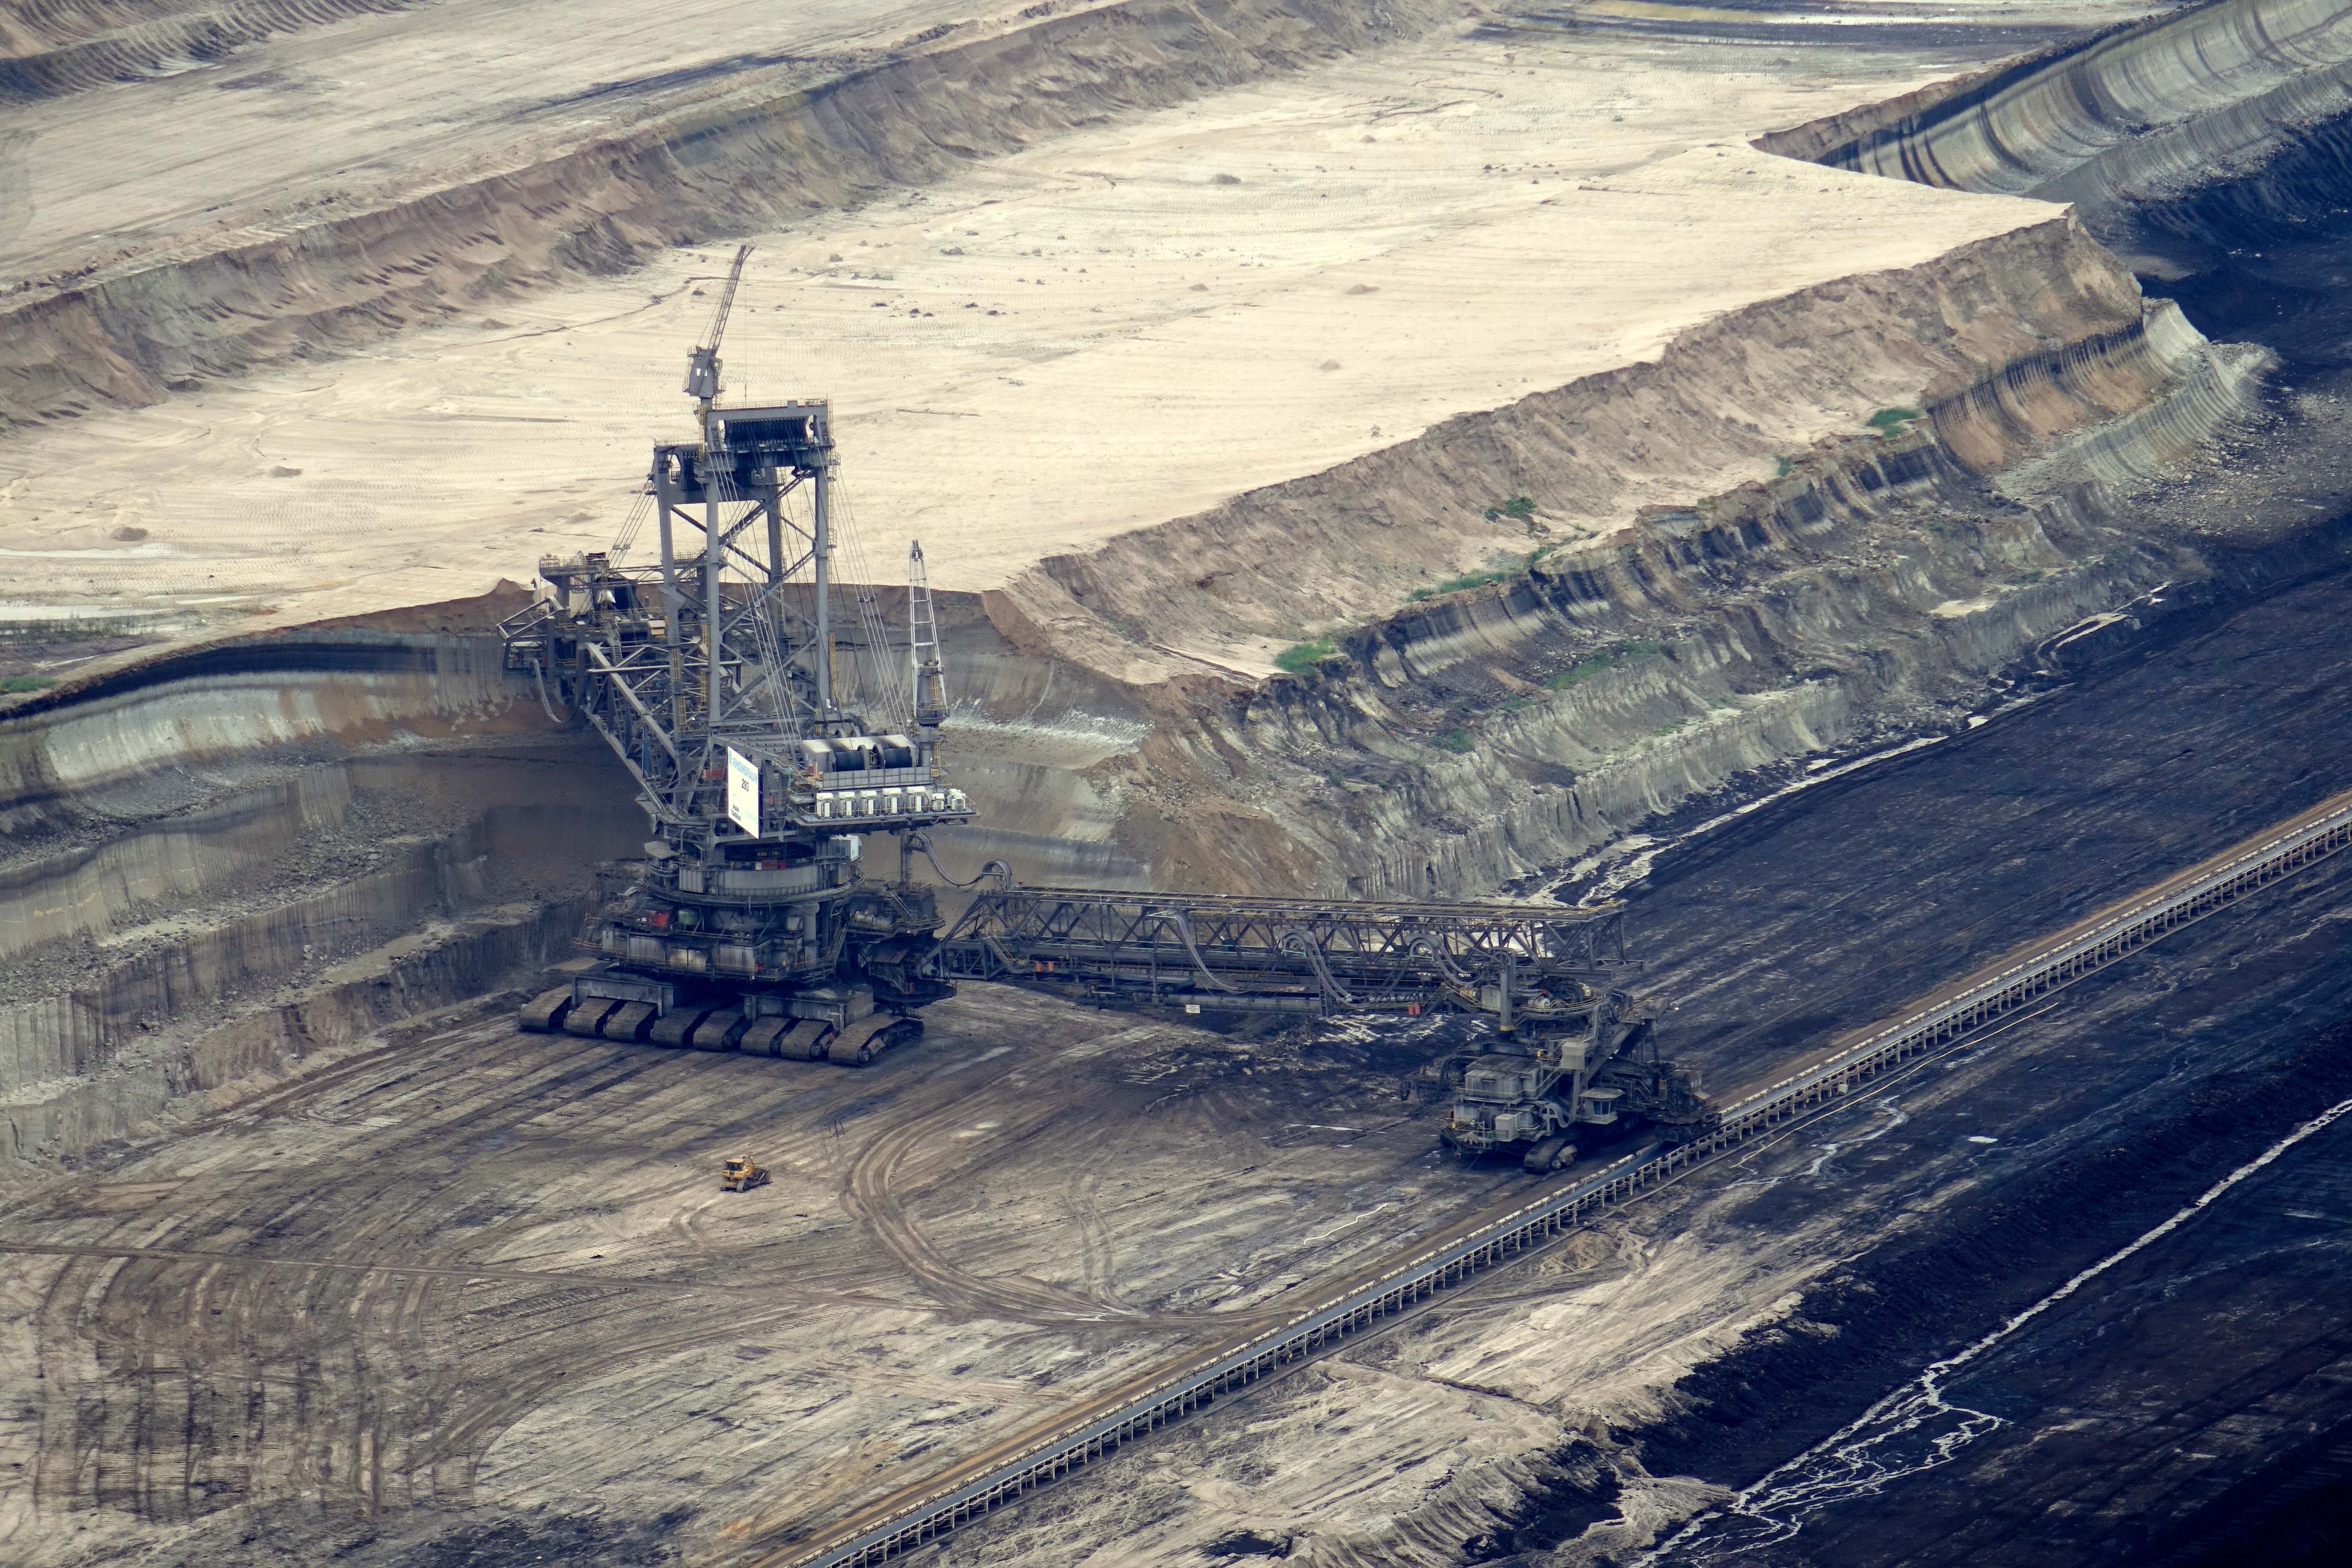 Australia’s mining giants: an accessory to the crime